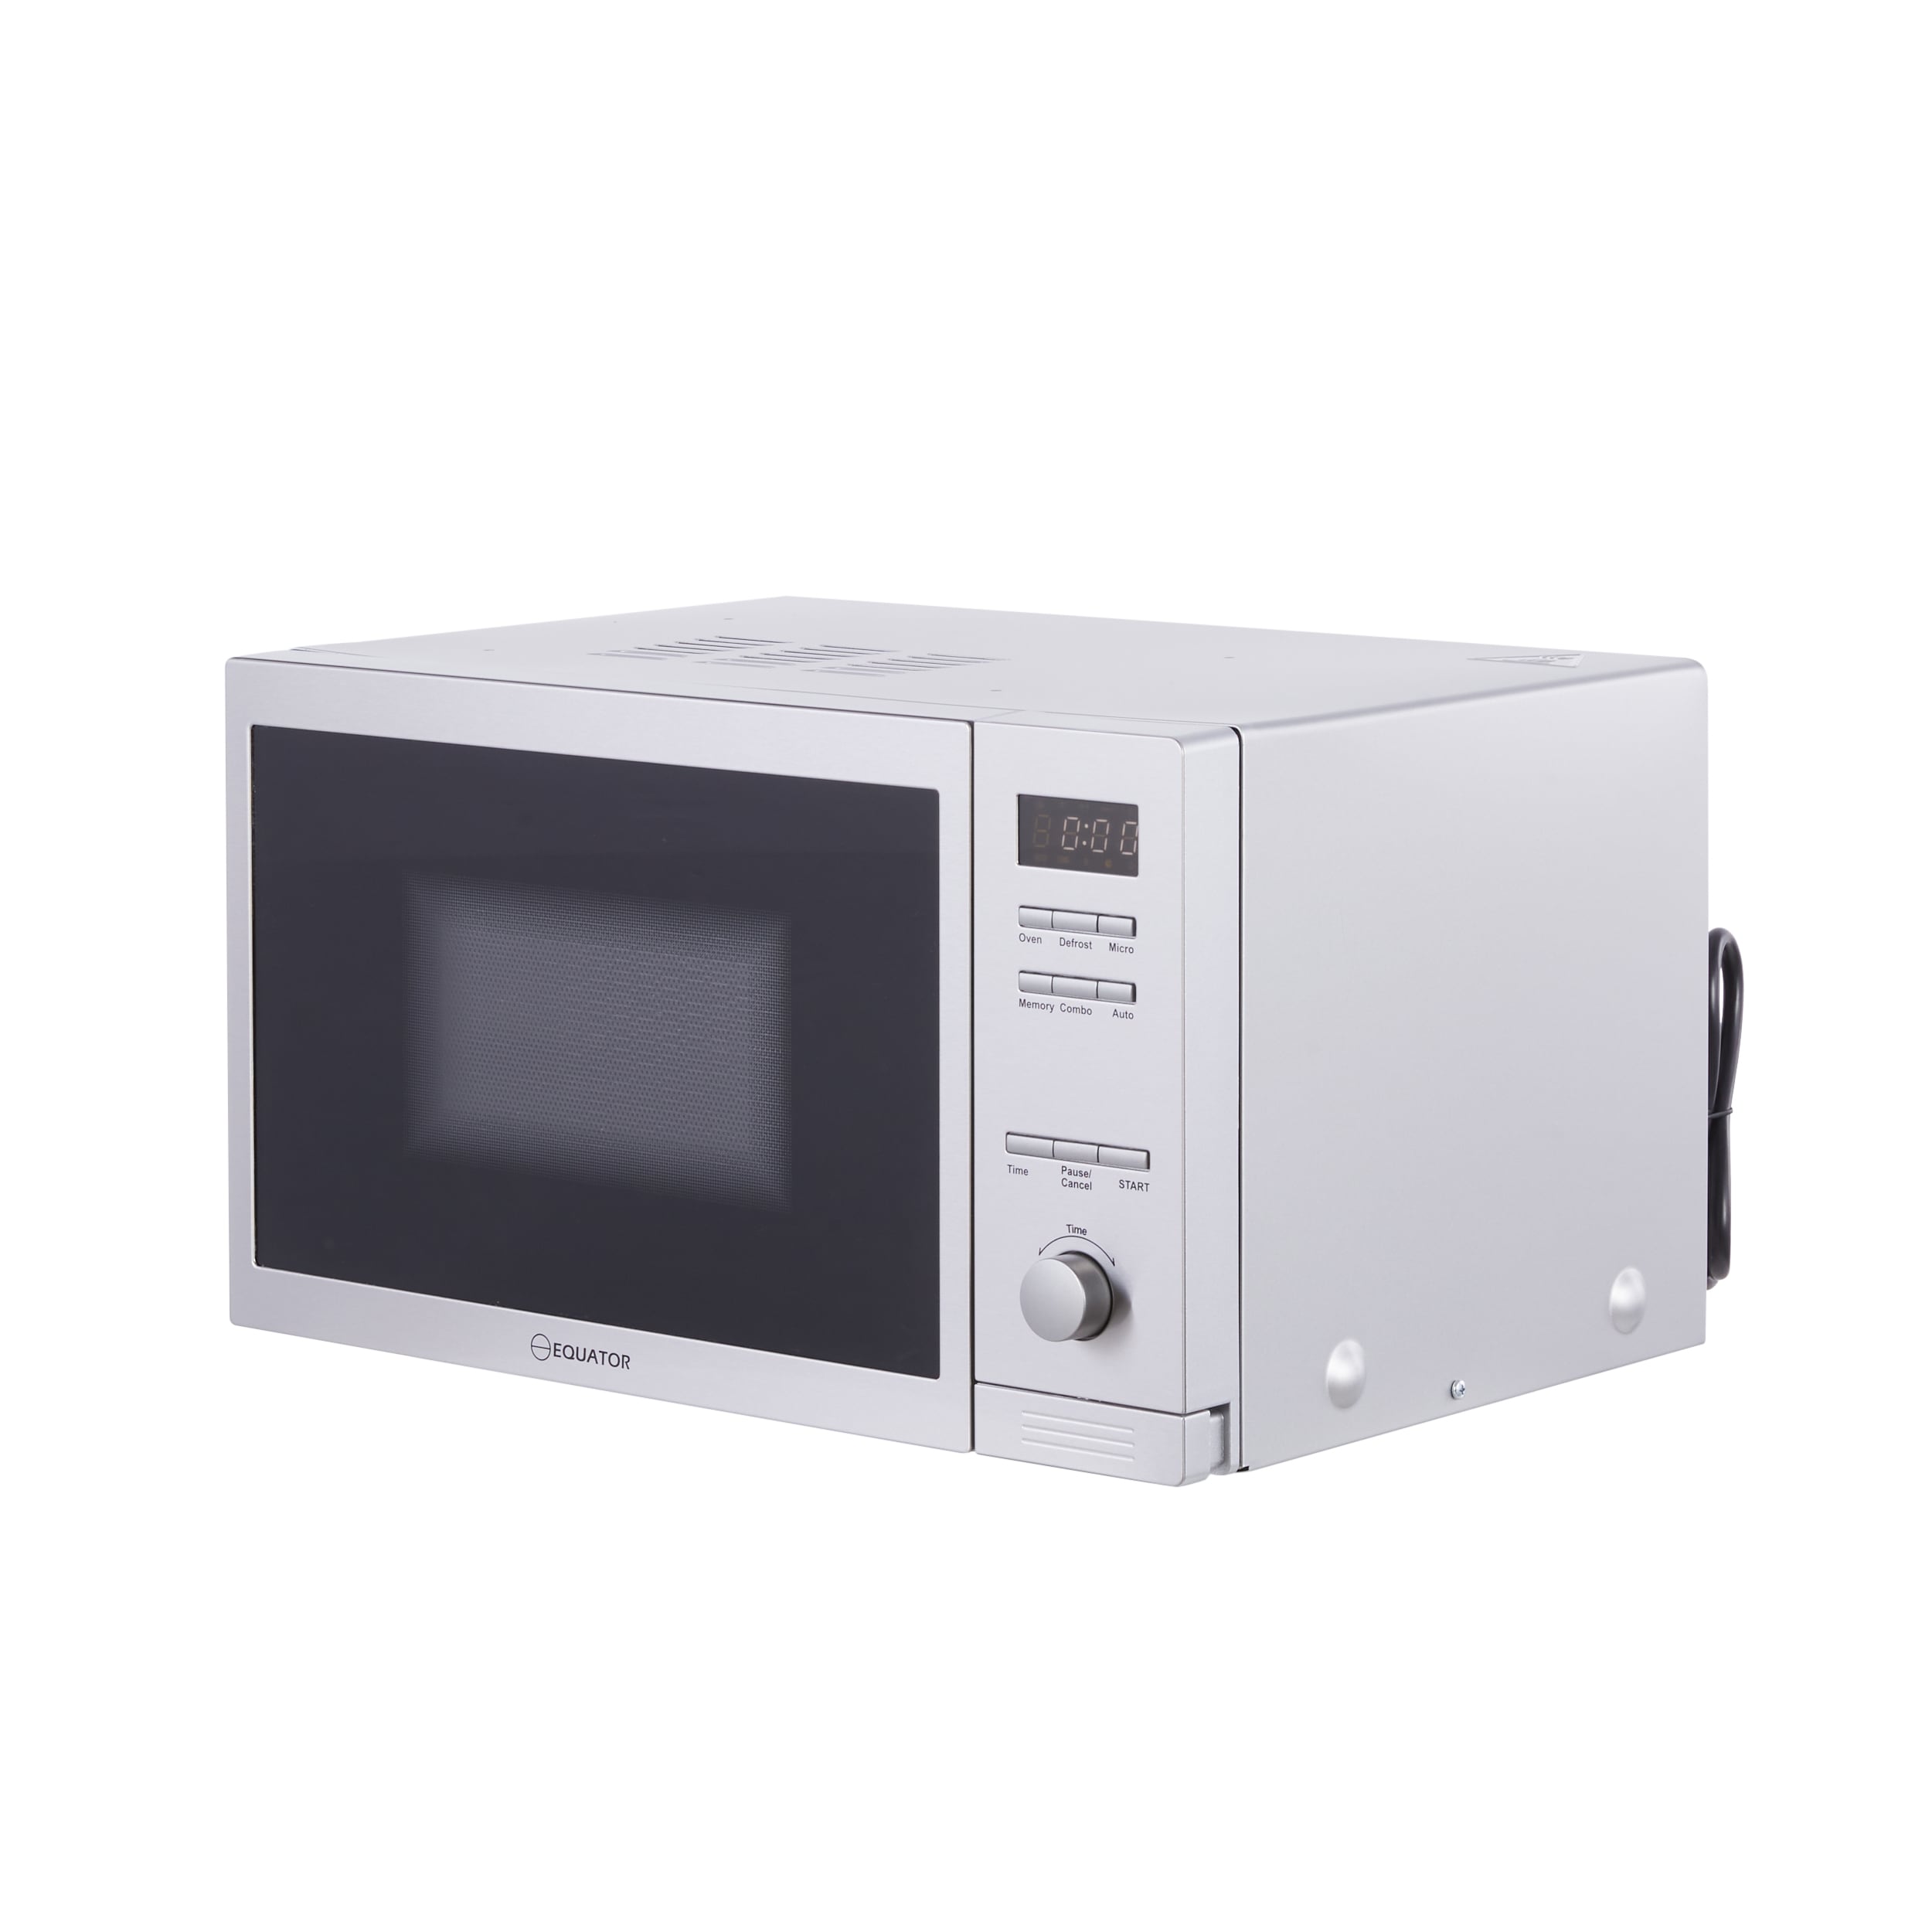 what is the smallest built in microwave available???